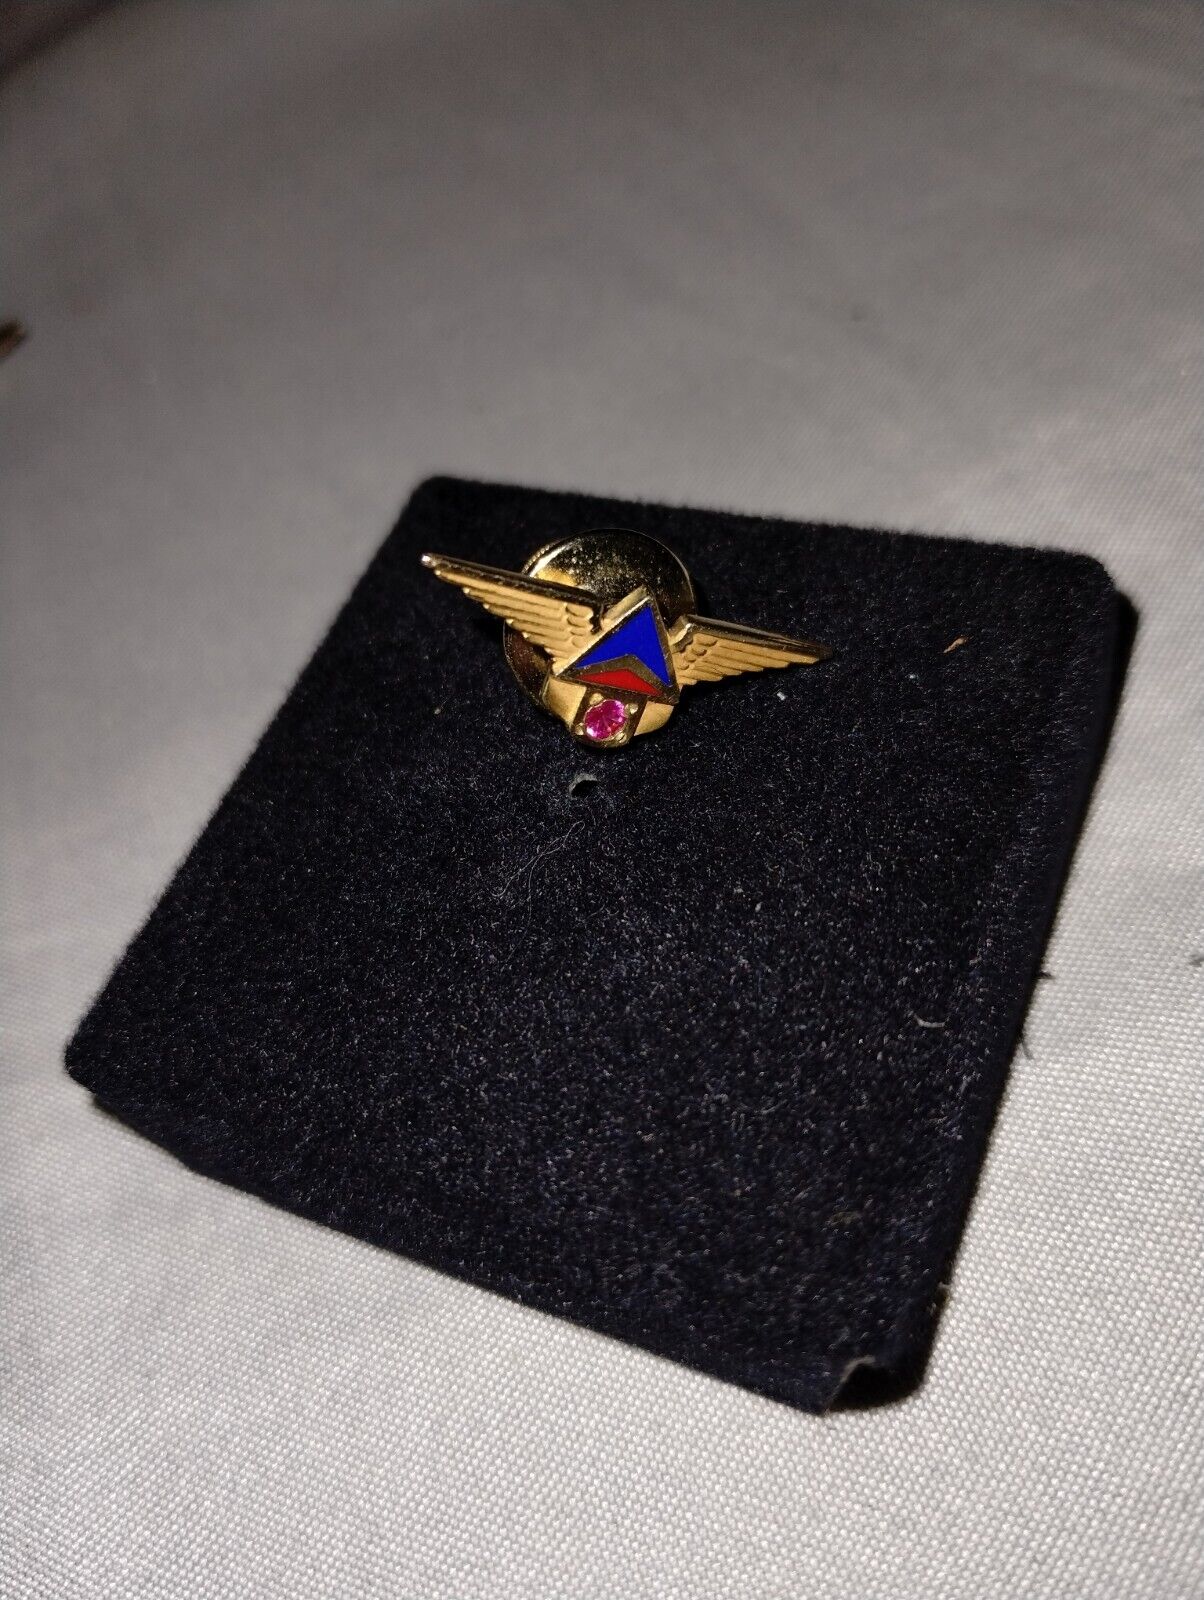 VINTAGE DELTA AIRLINES WINGS BADGE SERVICE PIN 10K GOLD/ RUBY LAPEL PIN TIE TAC